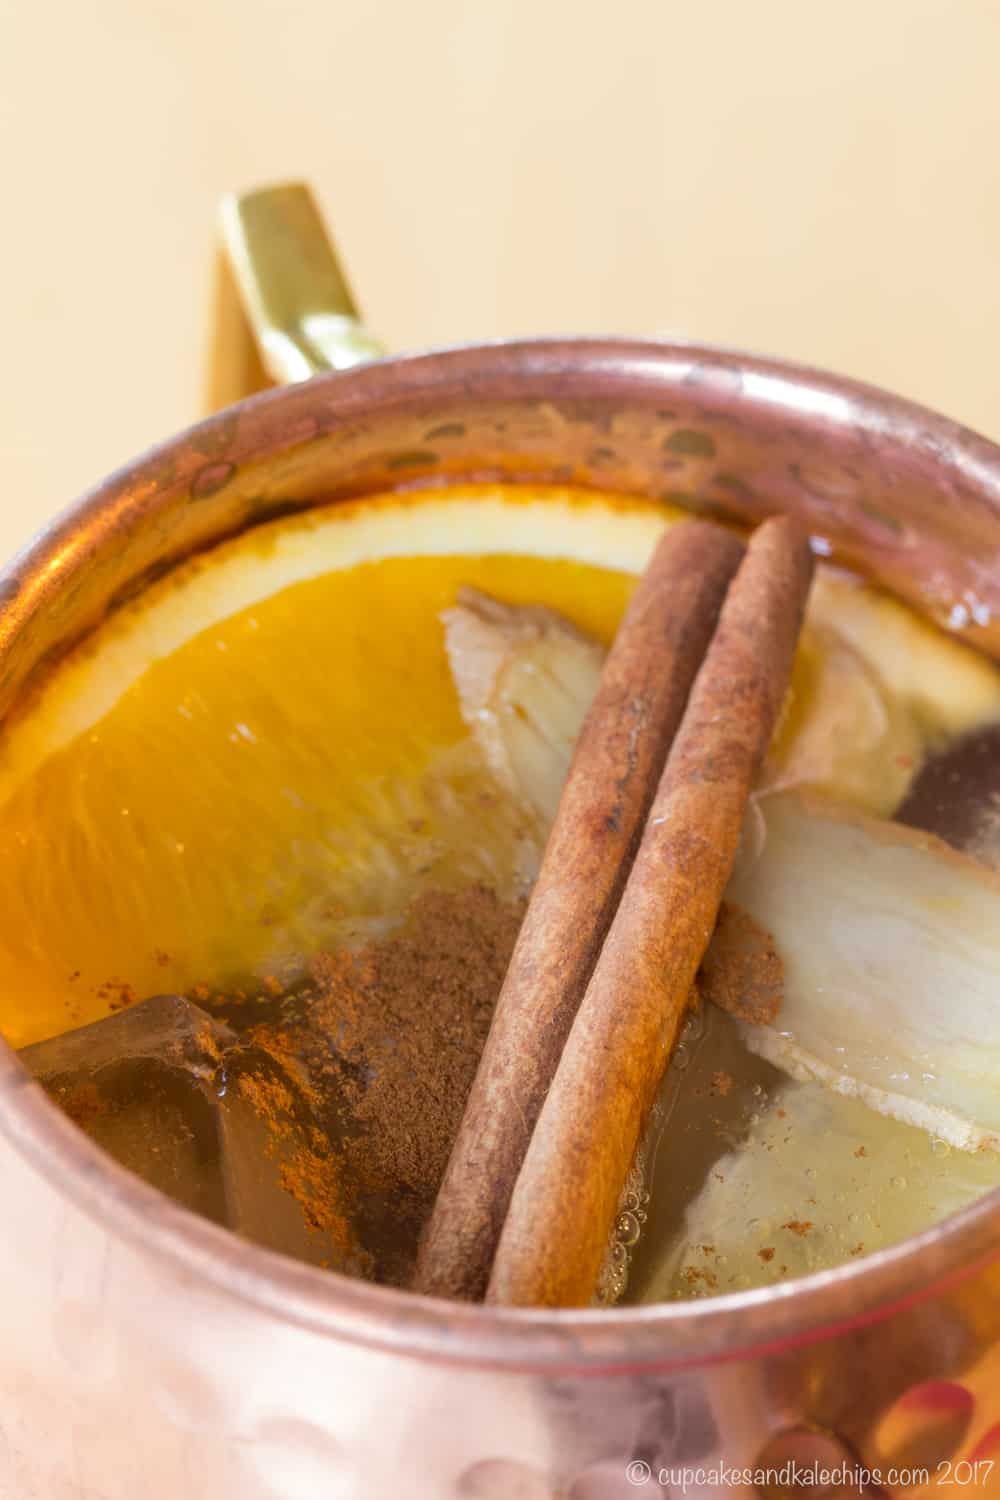 Closeup of the cinnamon stick, fresh ginger, and orange slice garnishes on top of a cocktail in a copper mug.